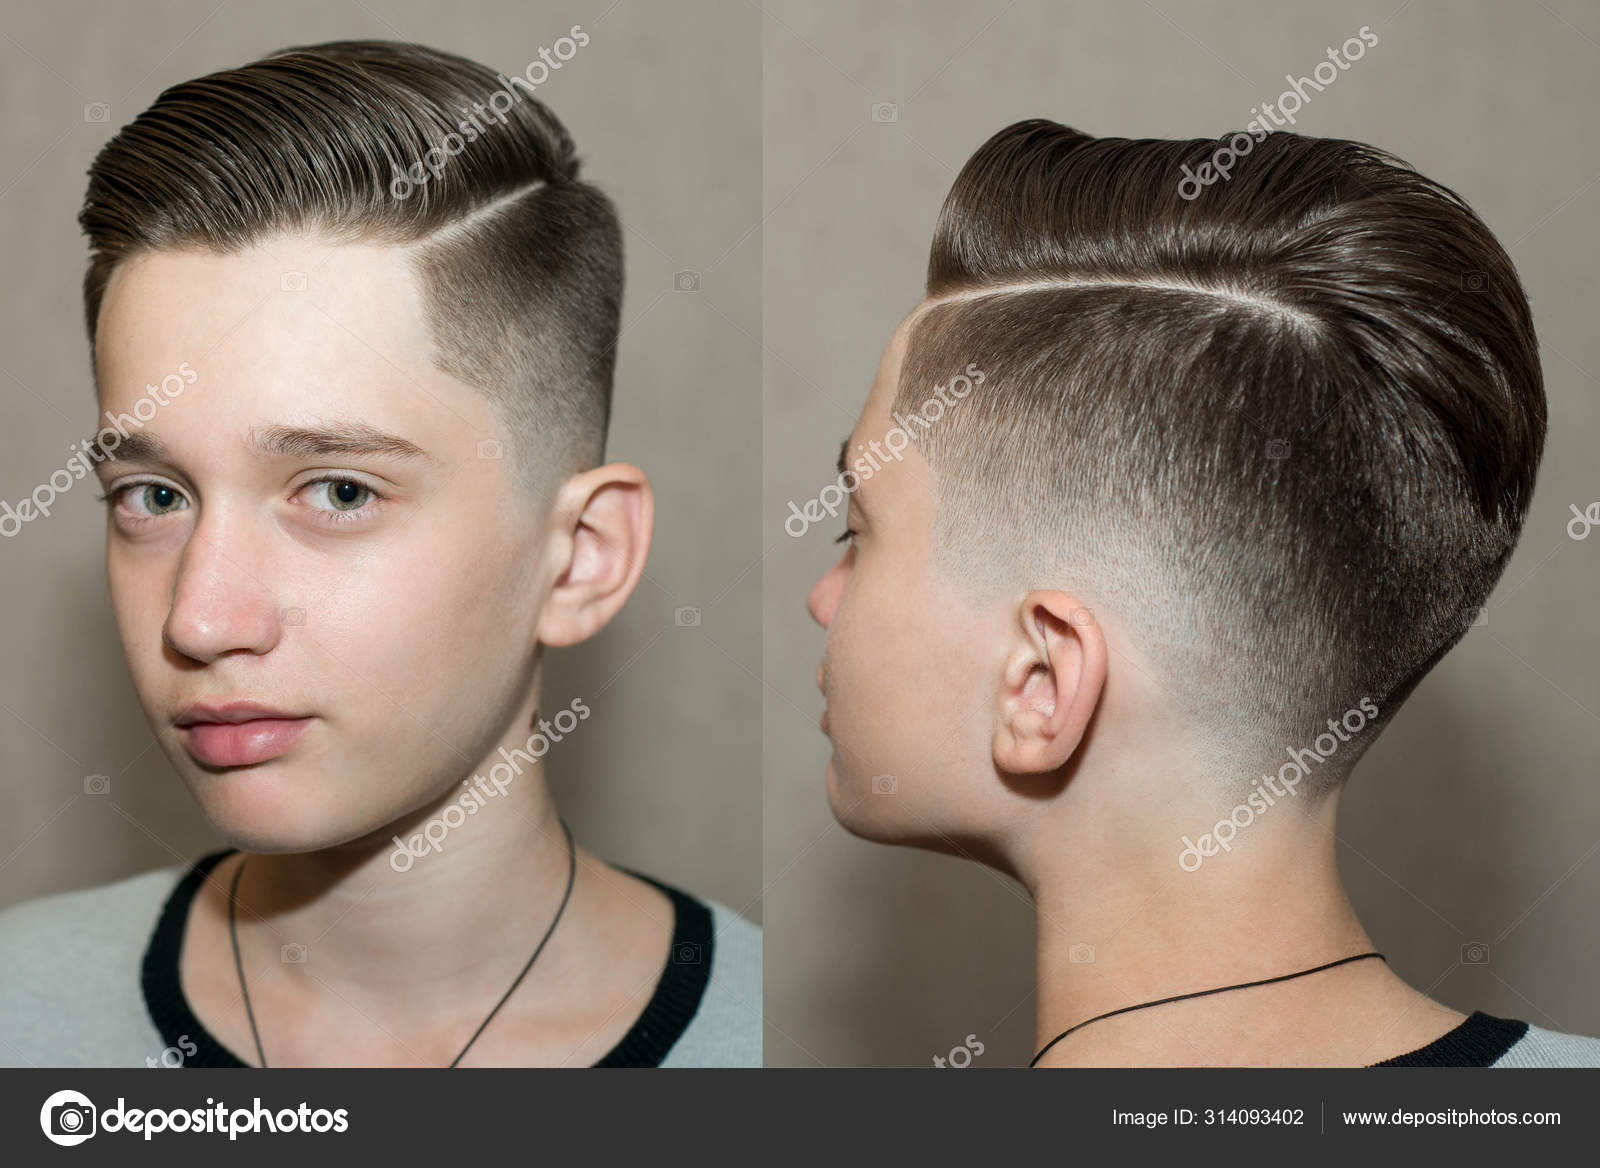 menshairstyles#cool#sidefaded#hairstyles#2019 | Cool hairstyles for men,  Haircuts for men, Mens hairstyles